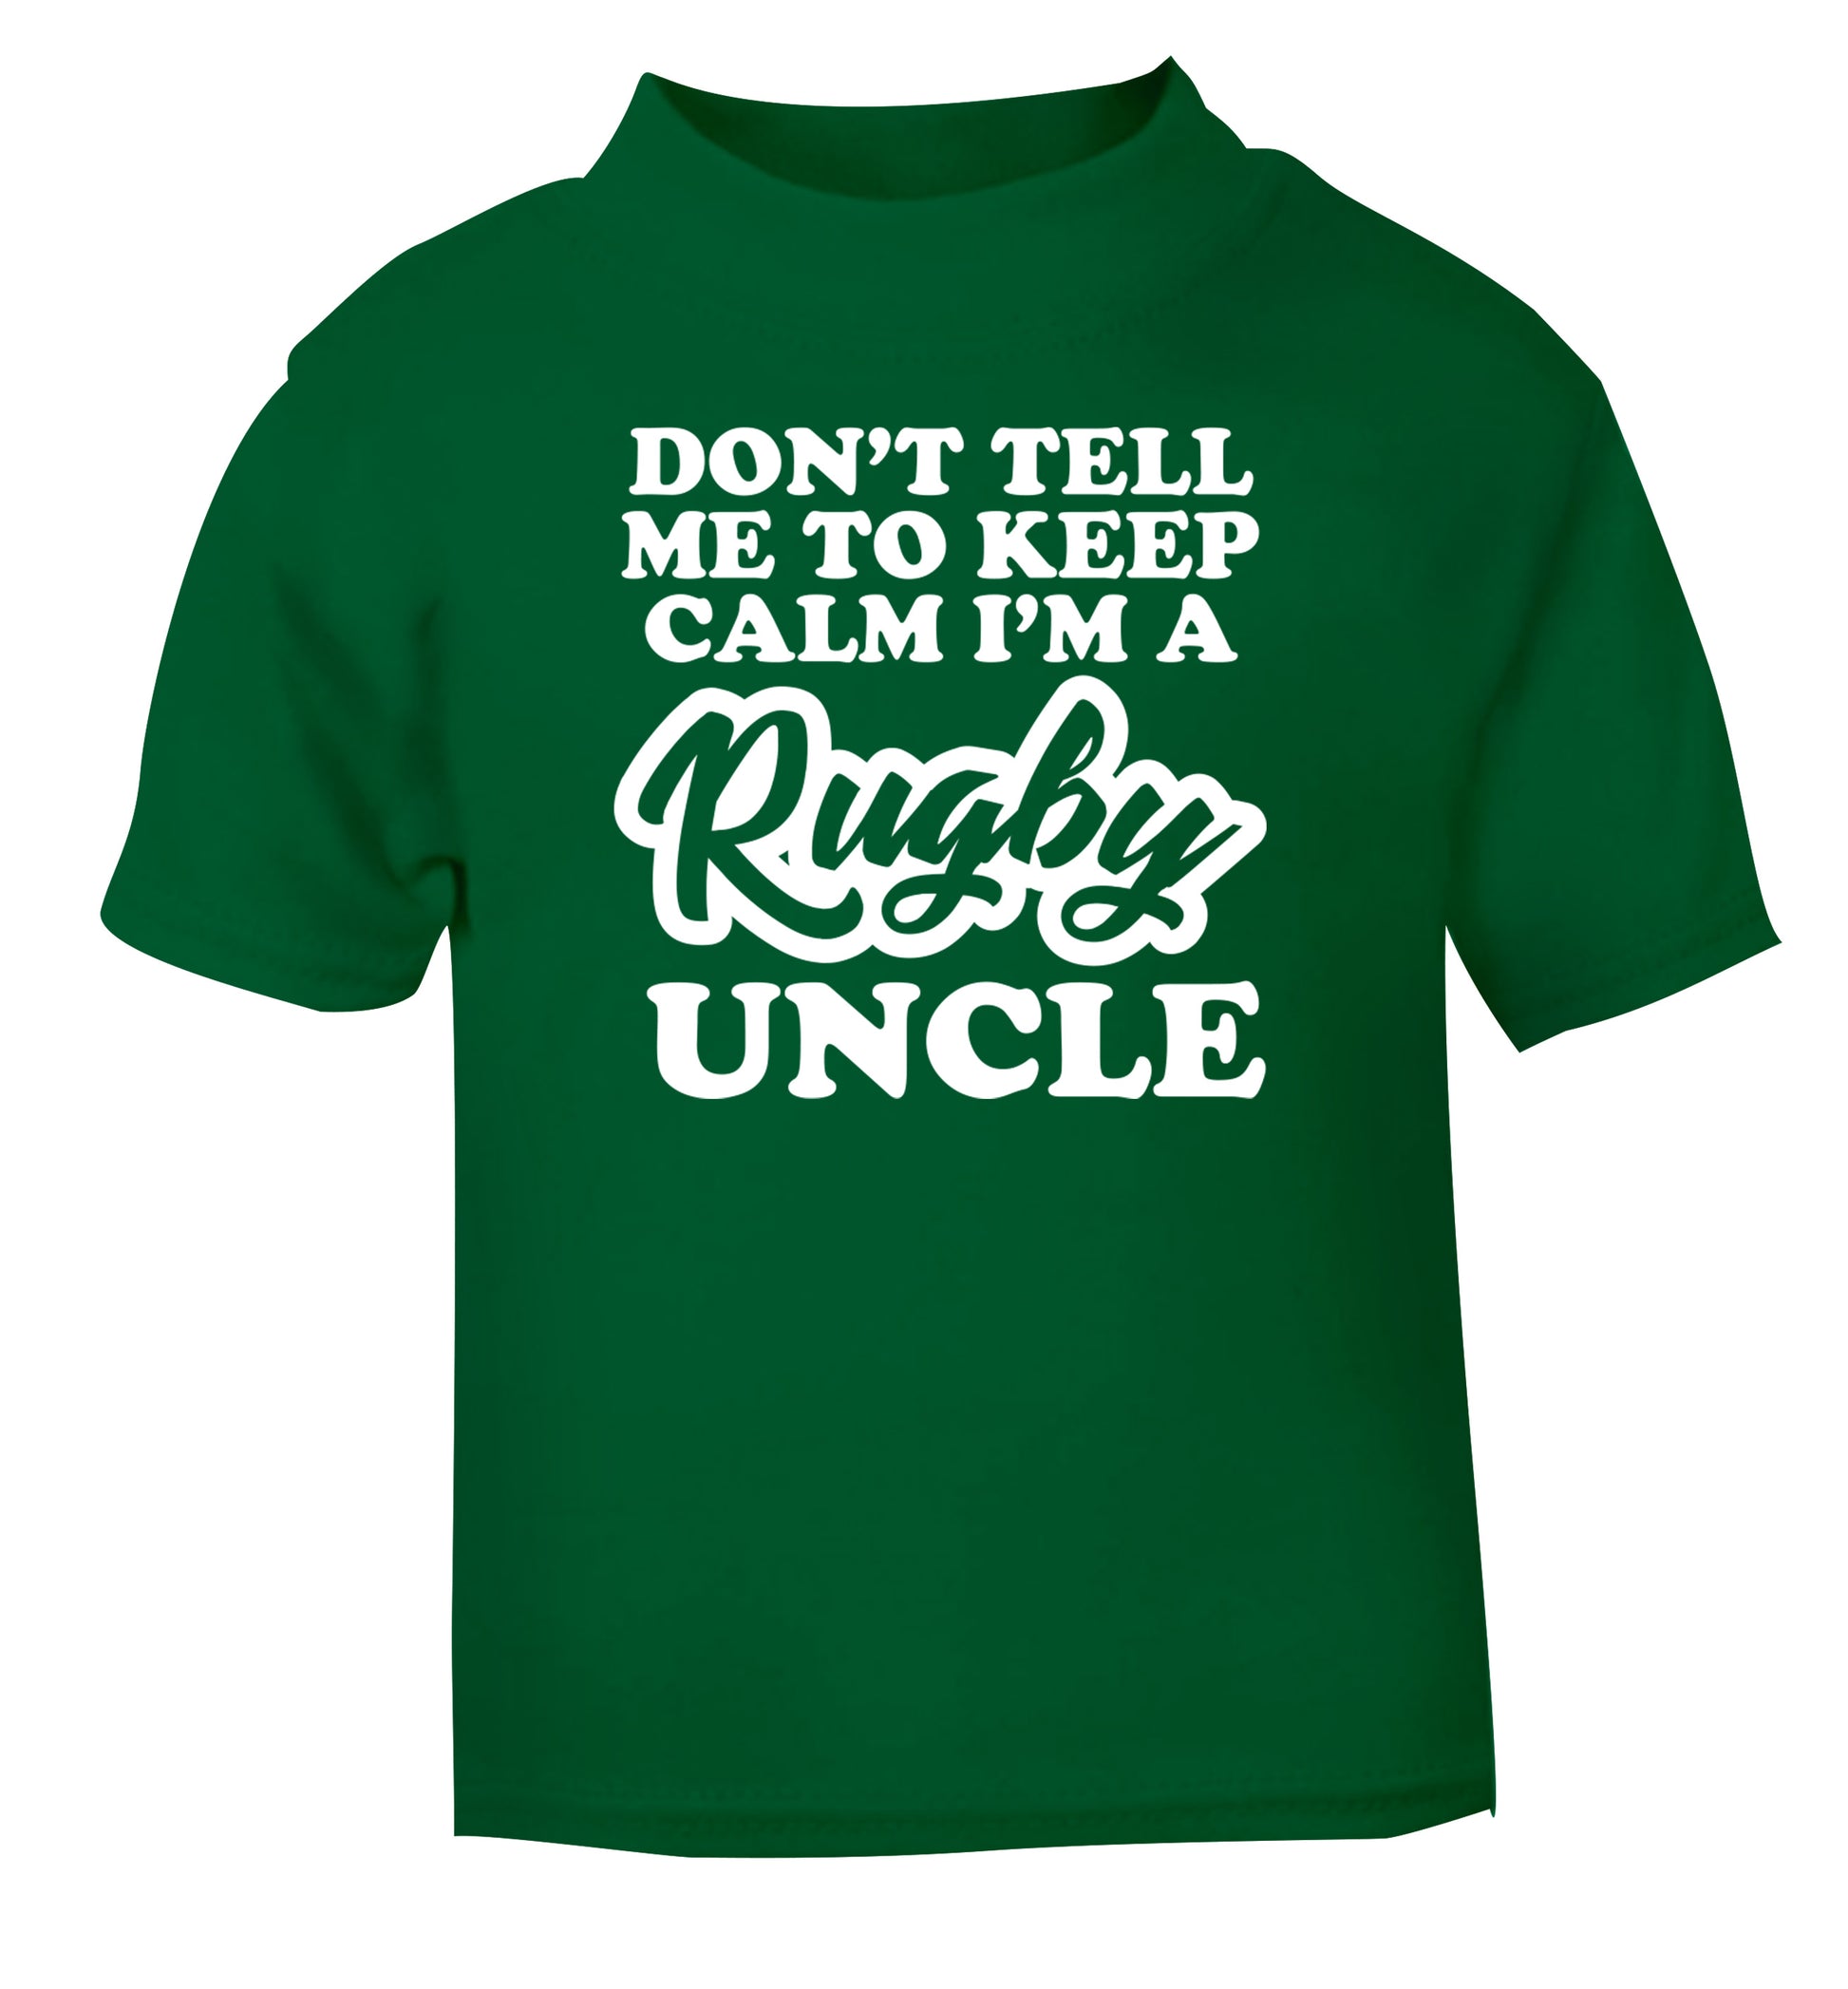 Don't tell me to keep calm I'm a rugby uncle green Baby Toddler Tshirt 2 Years